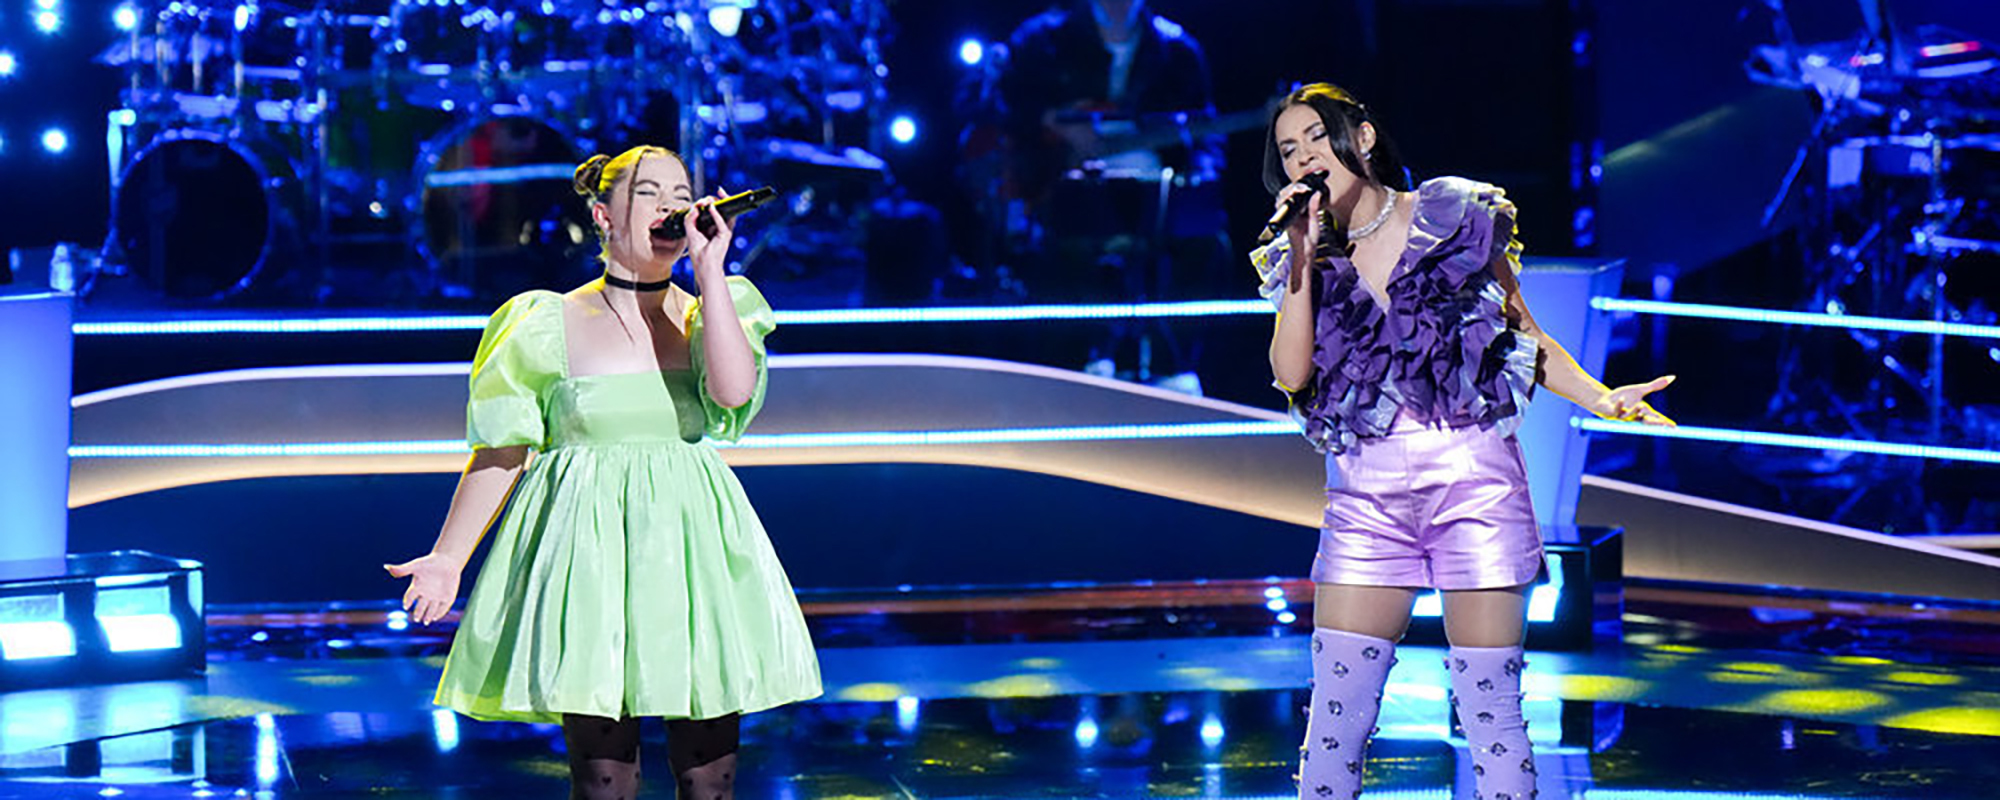 Watch: Rudi and Joslynn Rose Wield Evanescence’s “My Immortal” in Recent Battle on ‘The Voice’